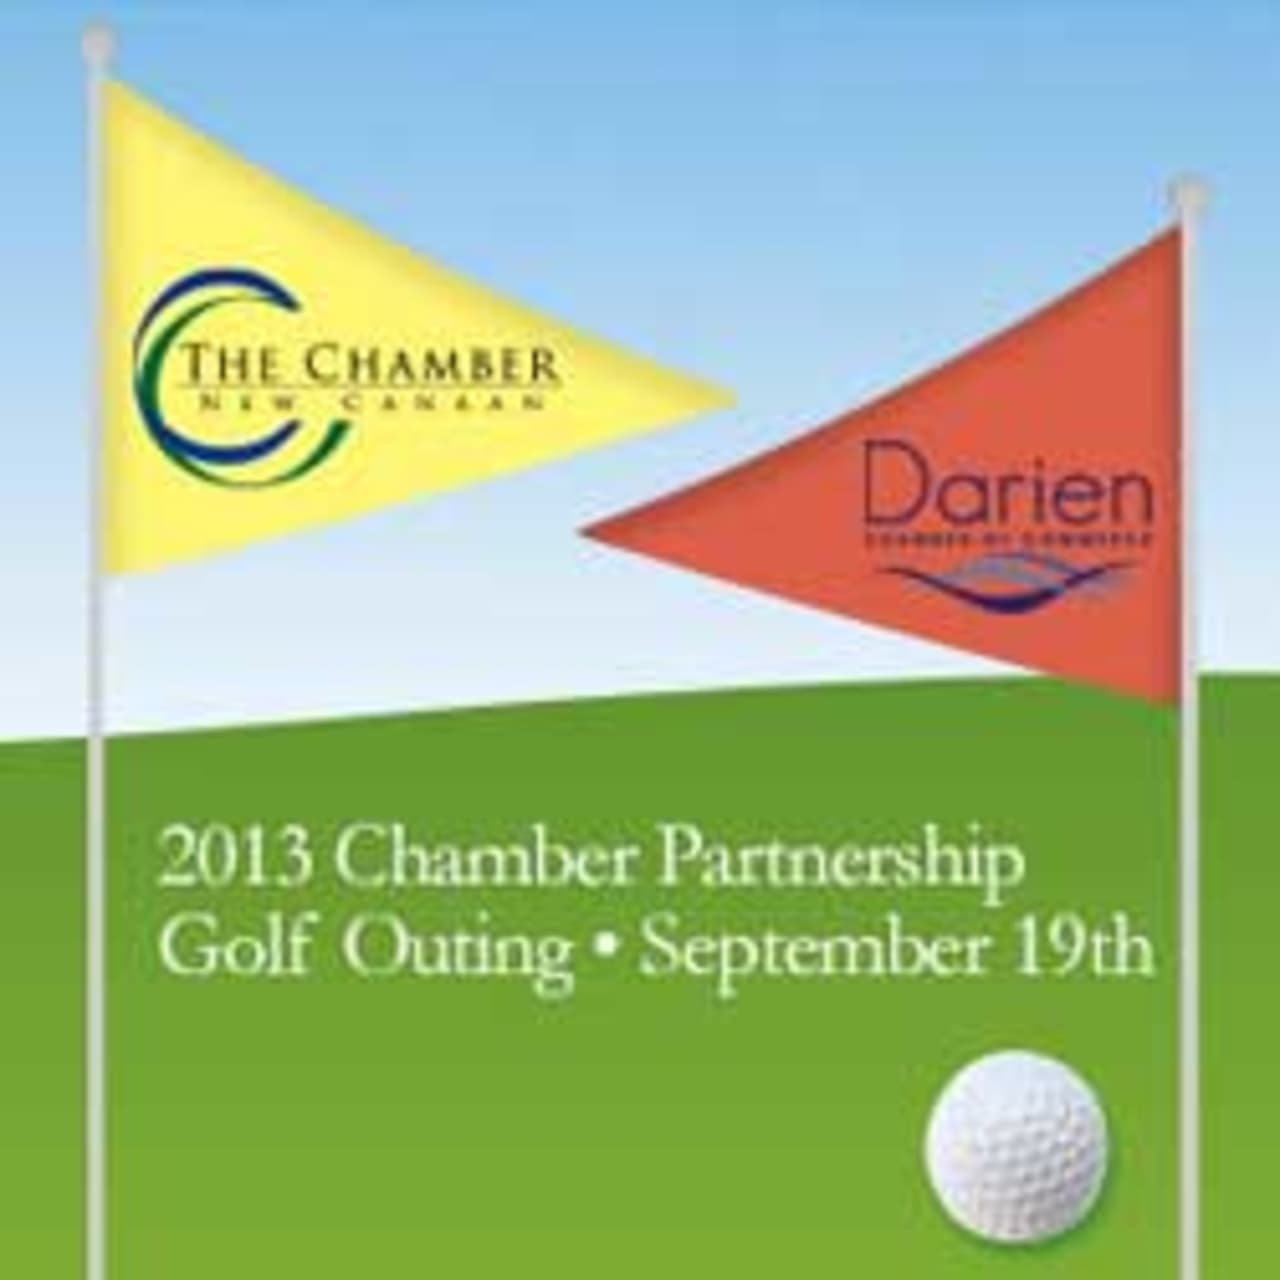 The New Canaan and Darien chambers of commerce are co-hosting a golf outing next month.